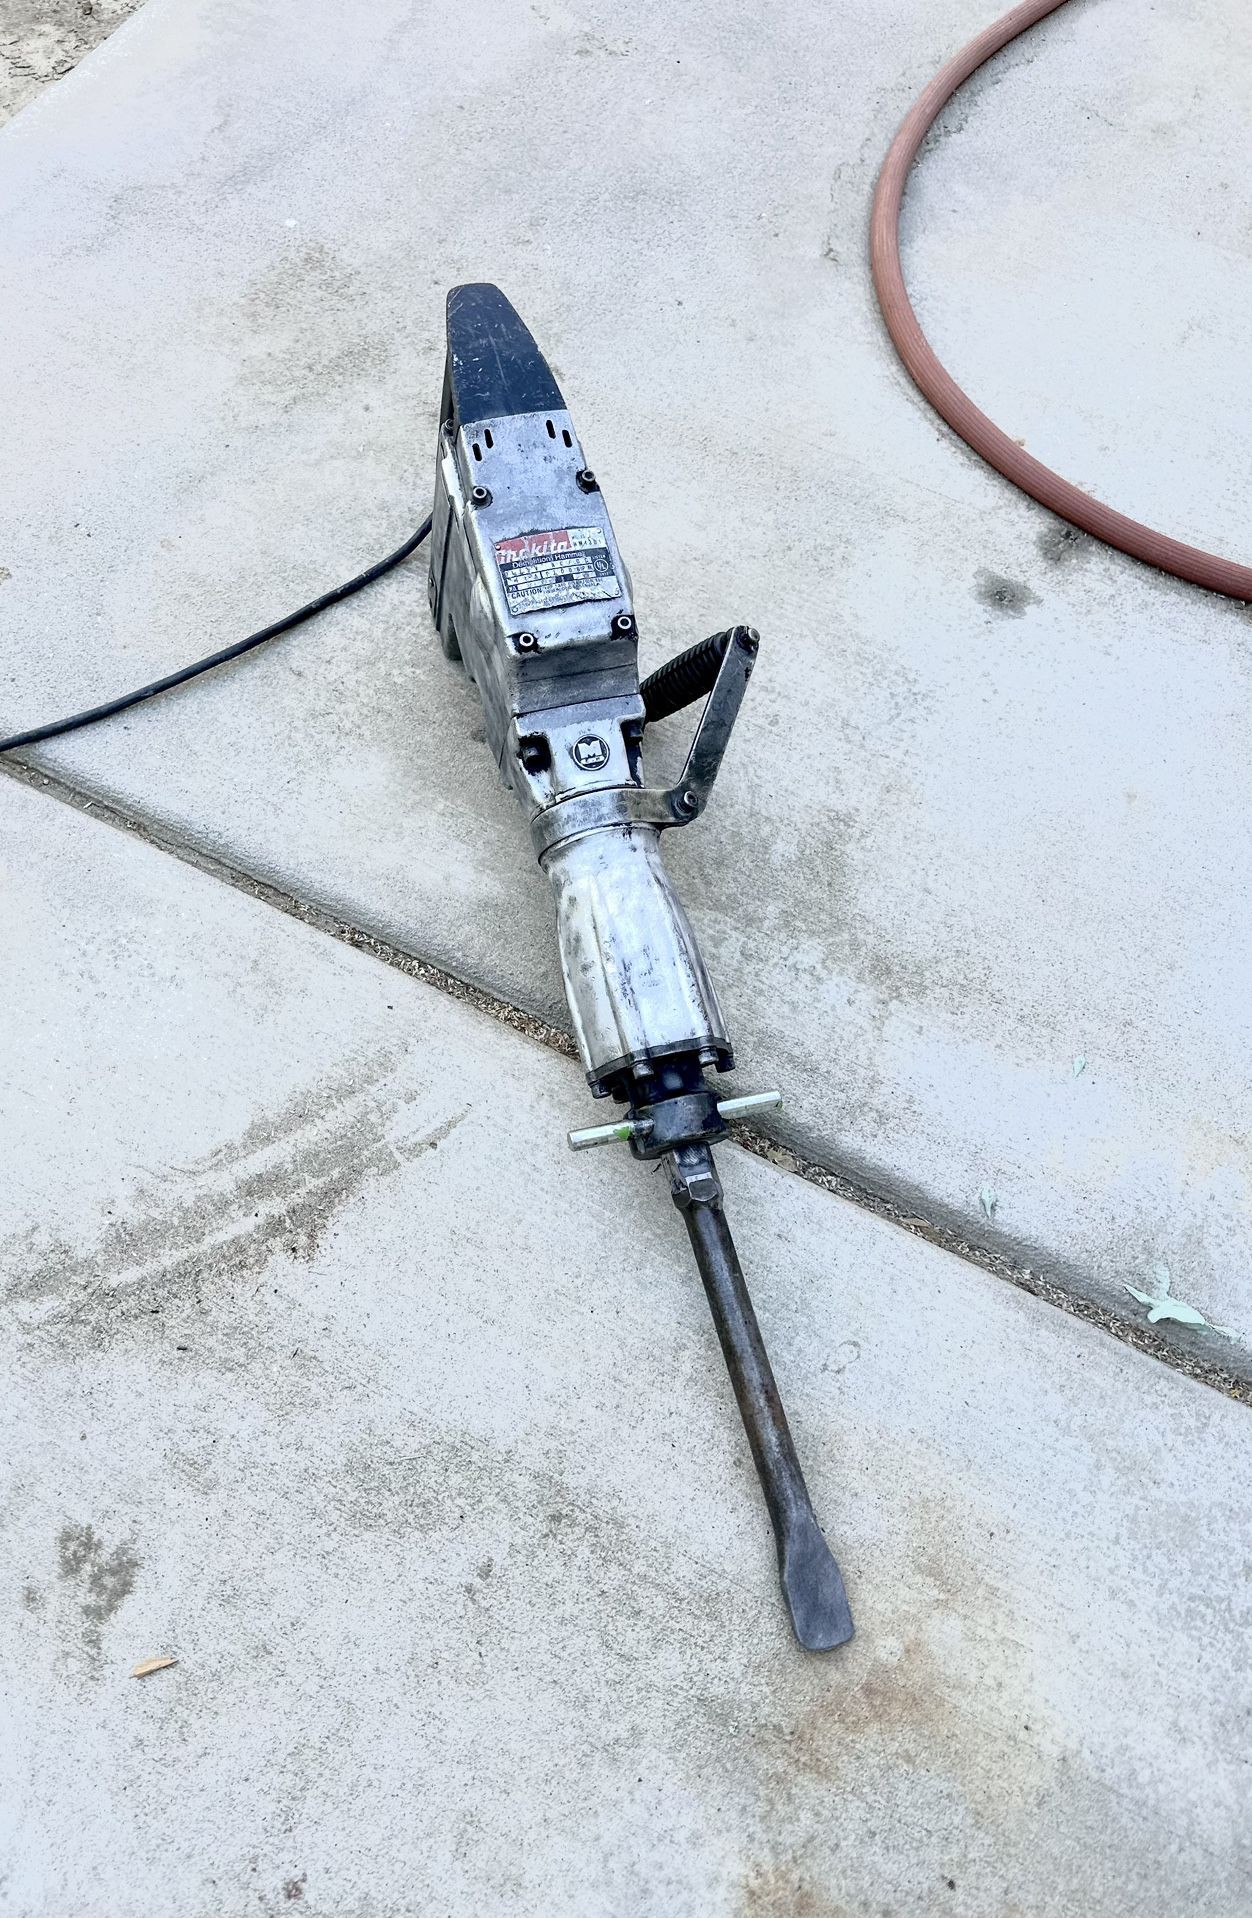 Makita Demolition Hammer HM1301 for Sale in Cathedral City, CA - OfferUp